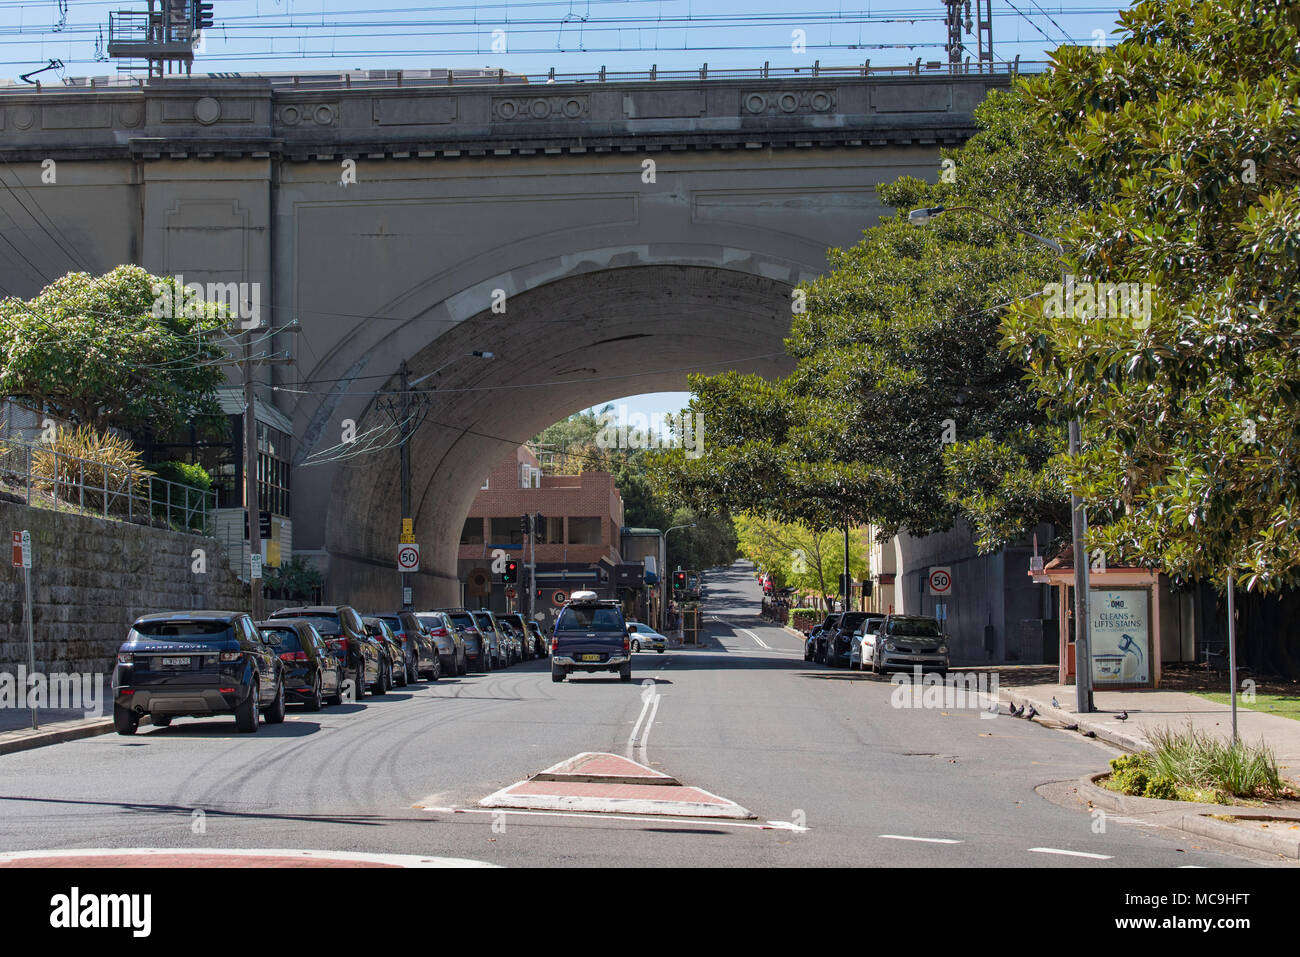 Fitzroy Street underbridge in Sydney's Milsons Point was constructed in 1927/28 as part of the northern approach to the Sydney Harbour Bridge, NSW. Stock Photo